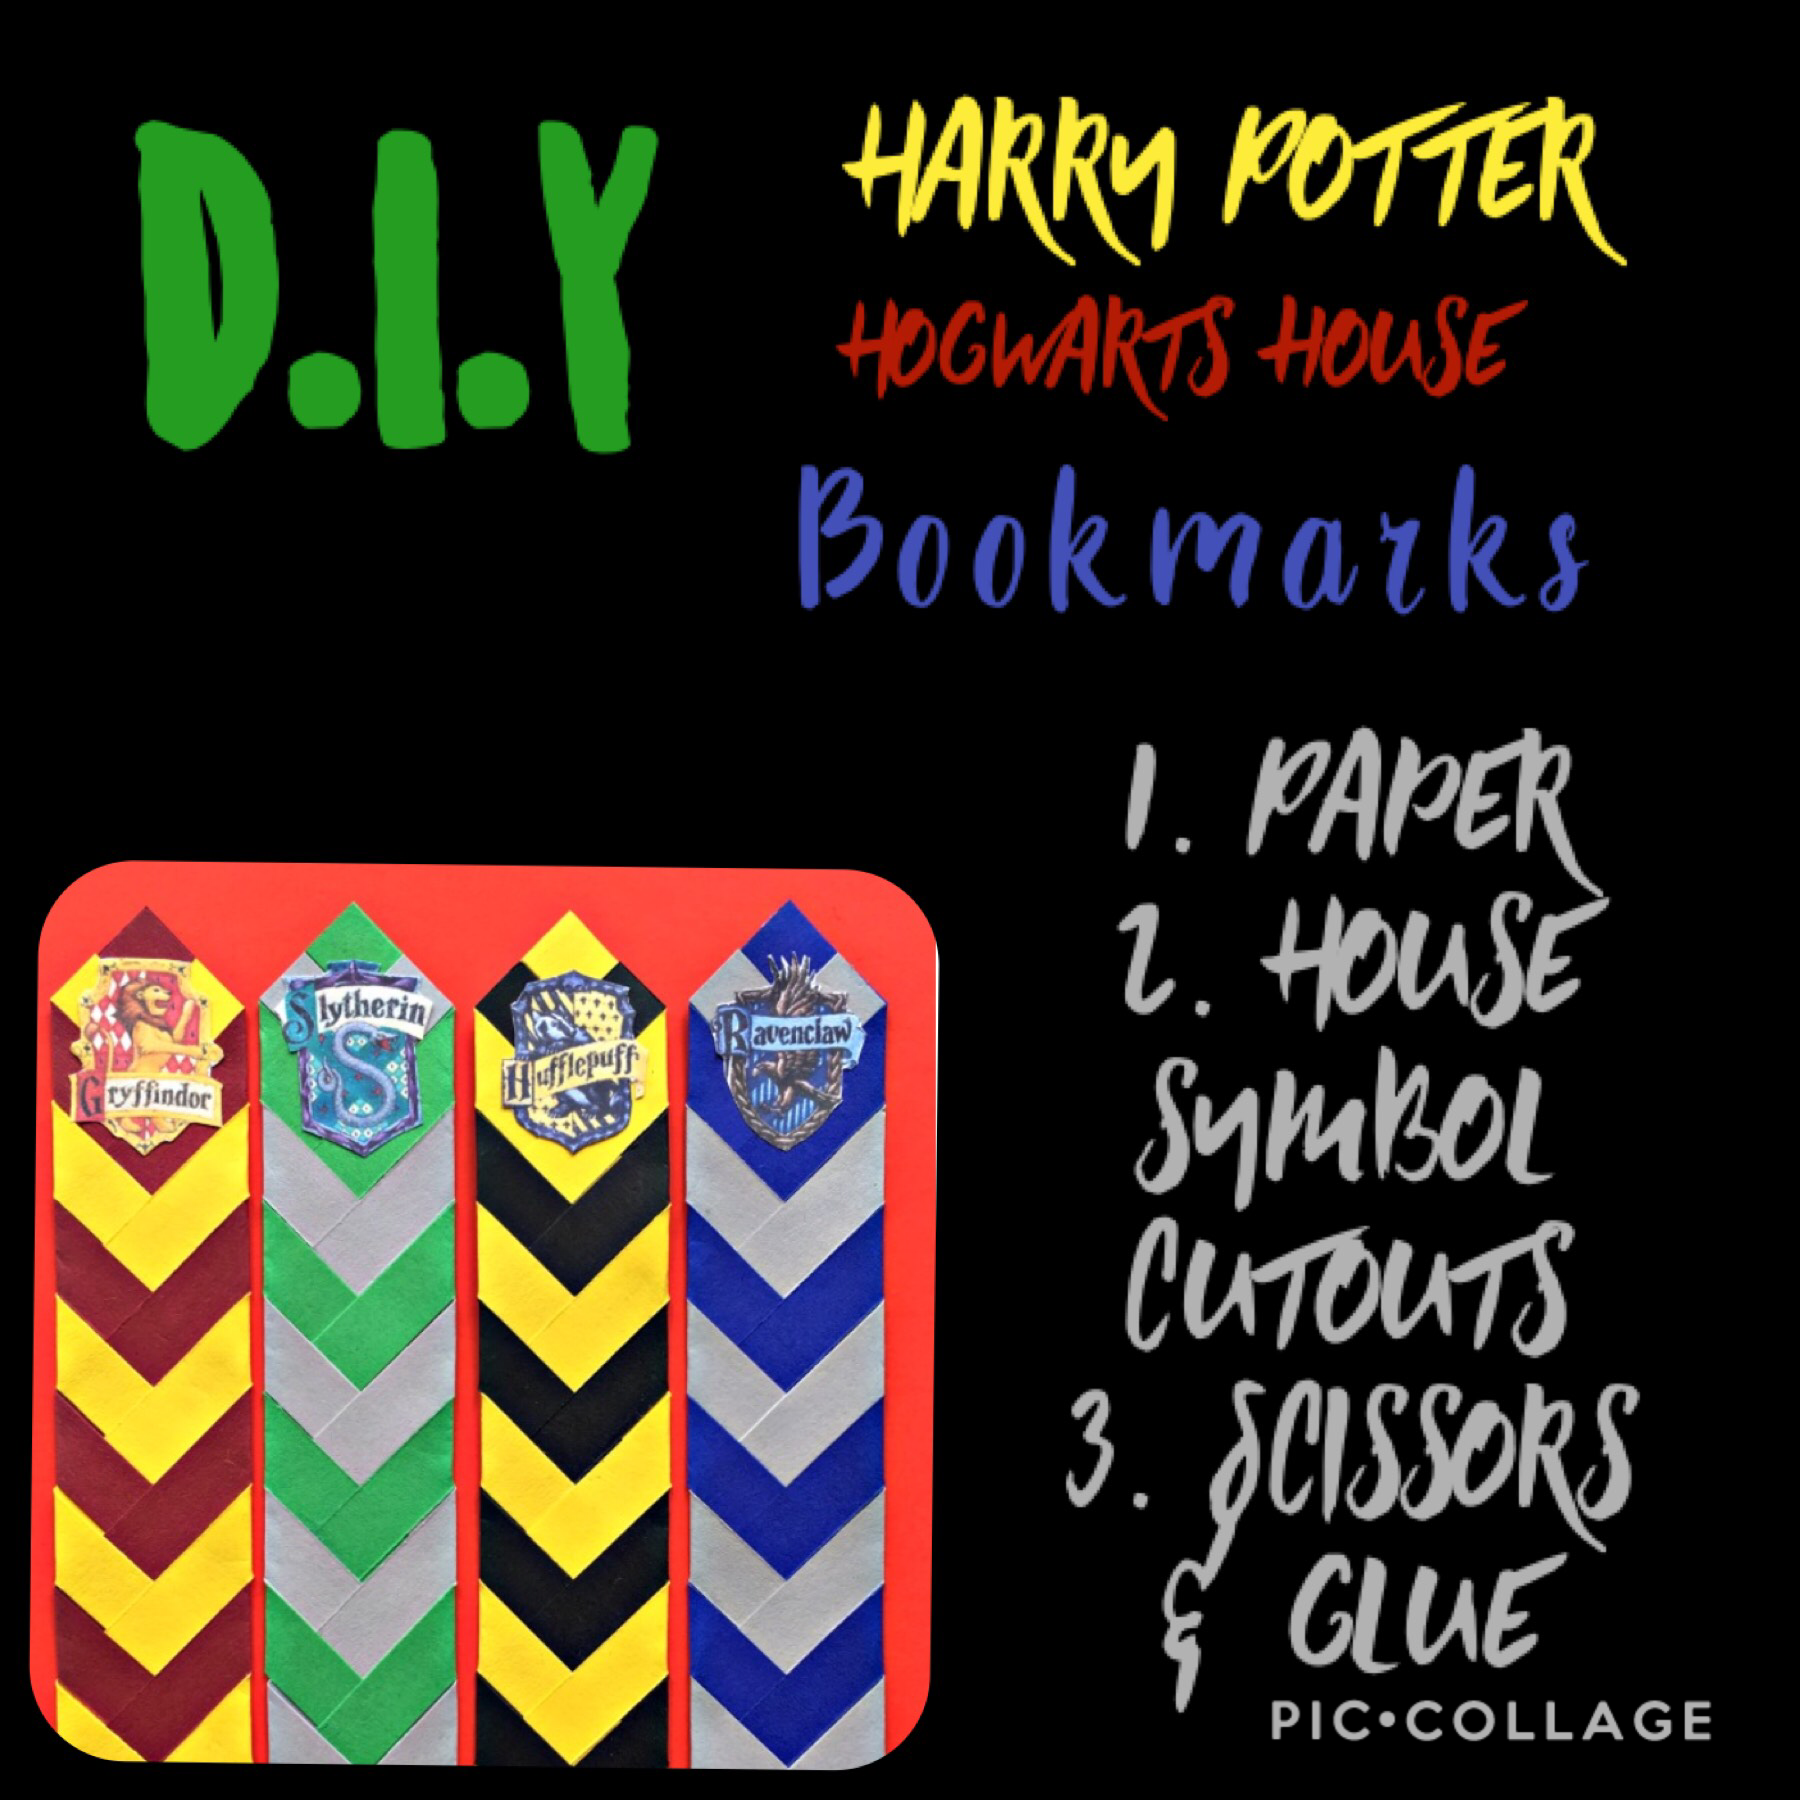 (Like if you would like to see more DIYs and how to do them!)